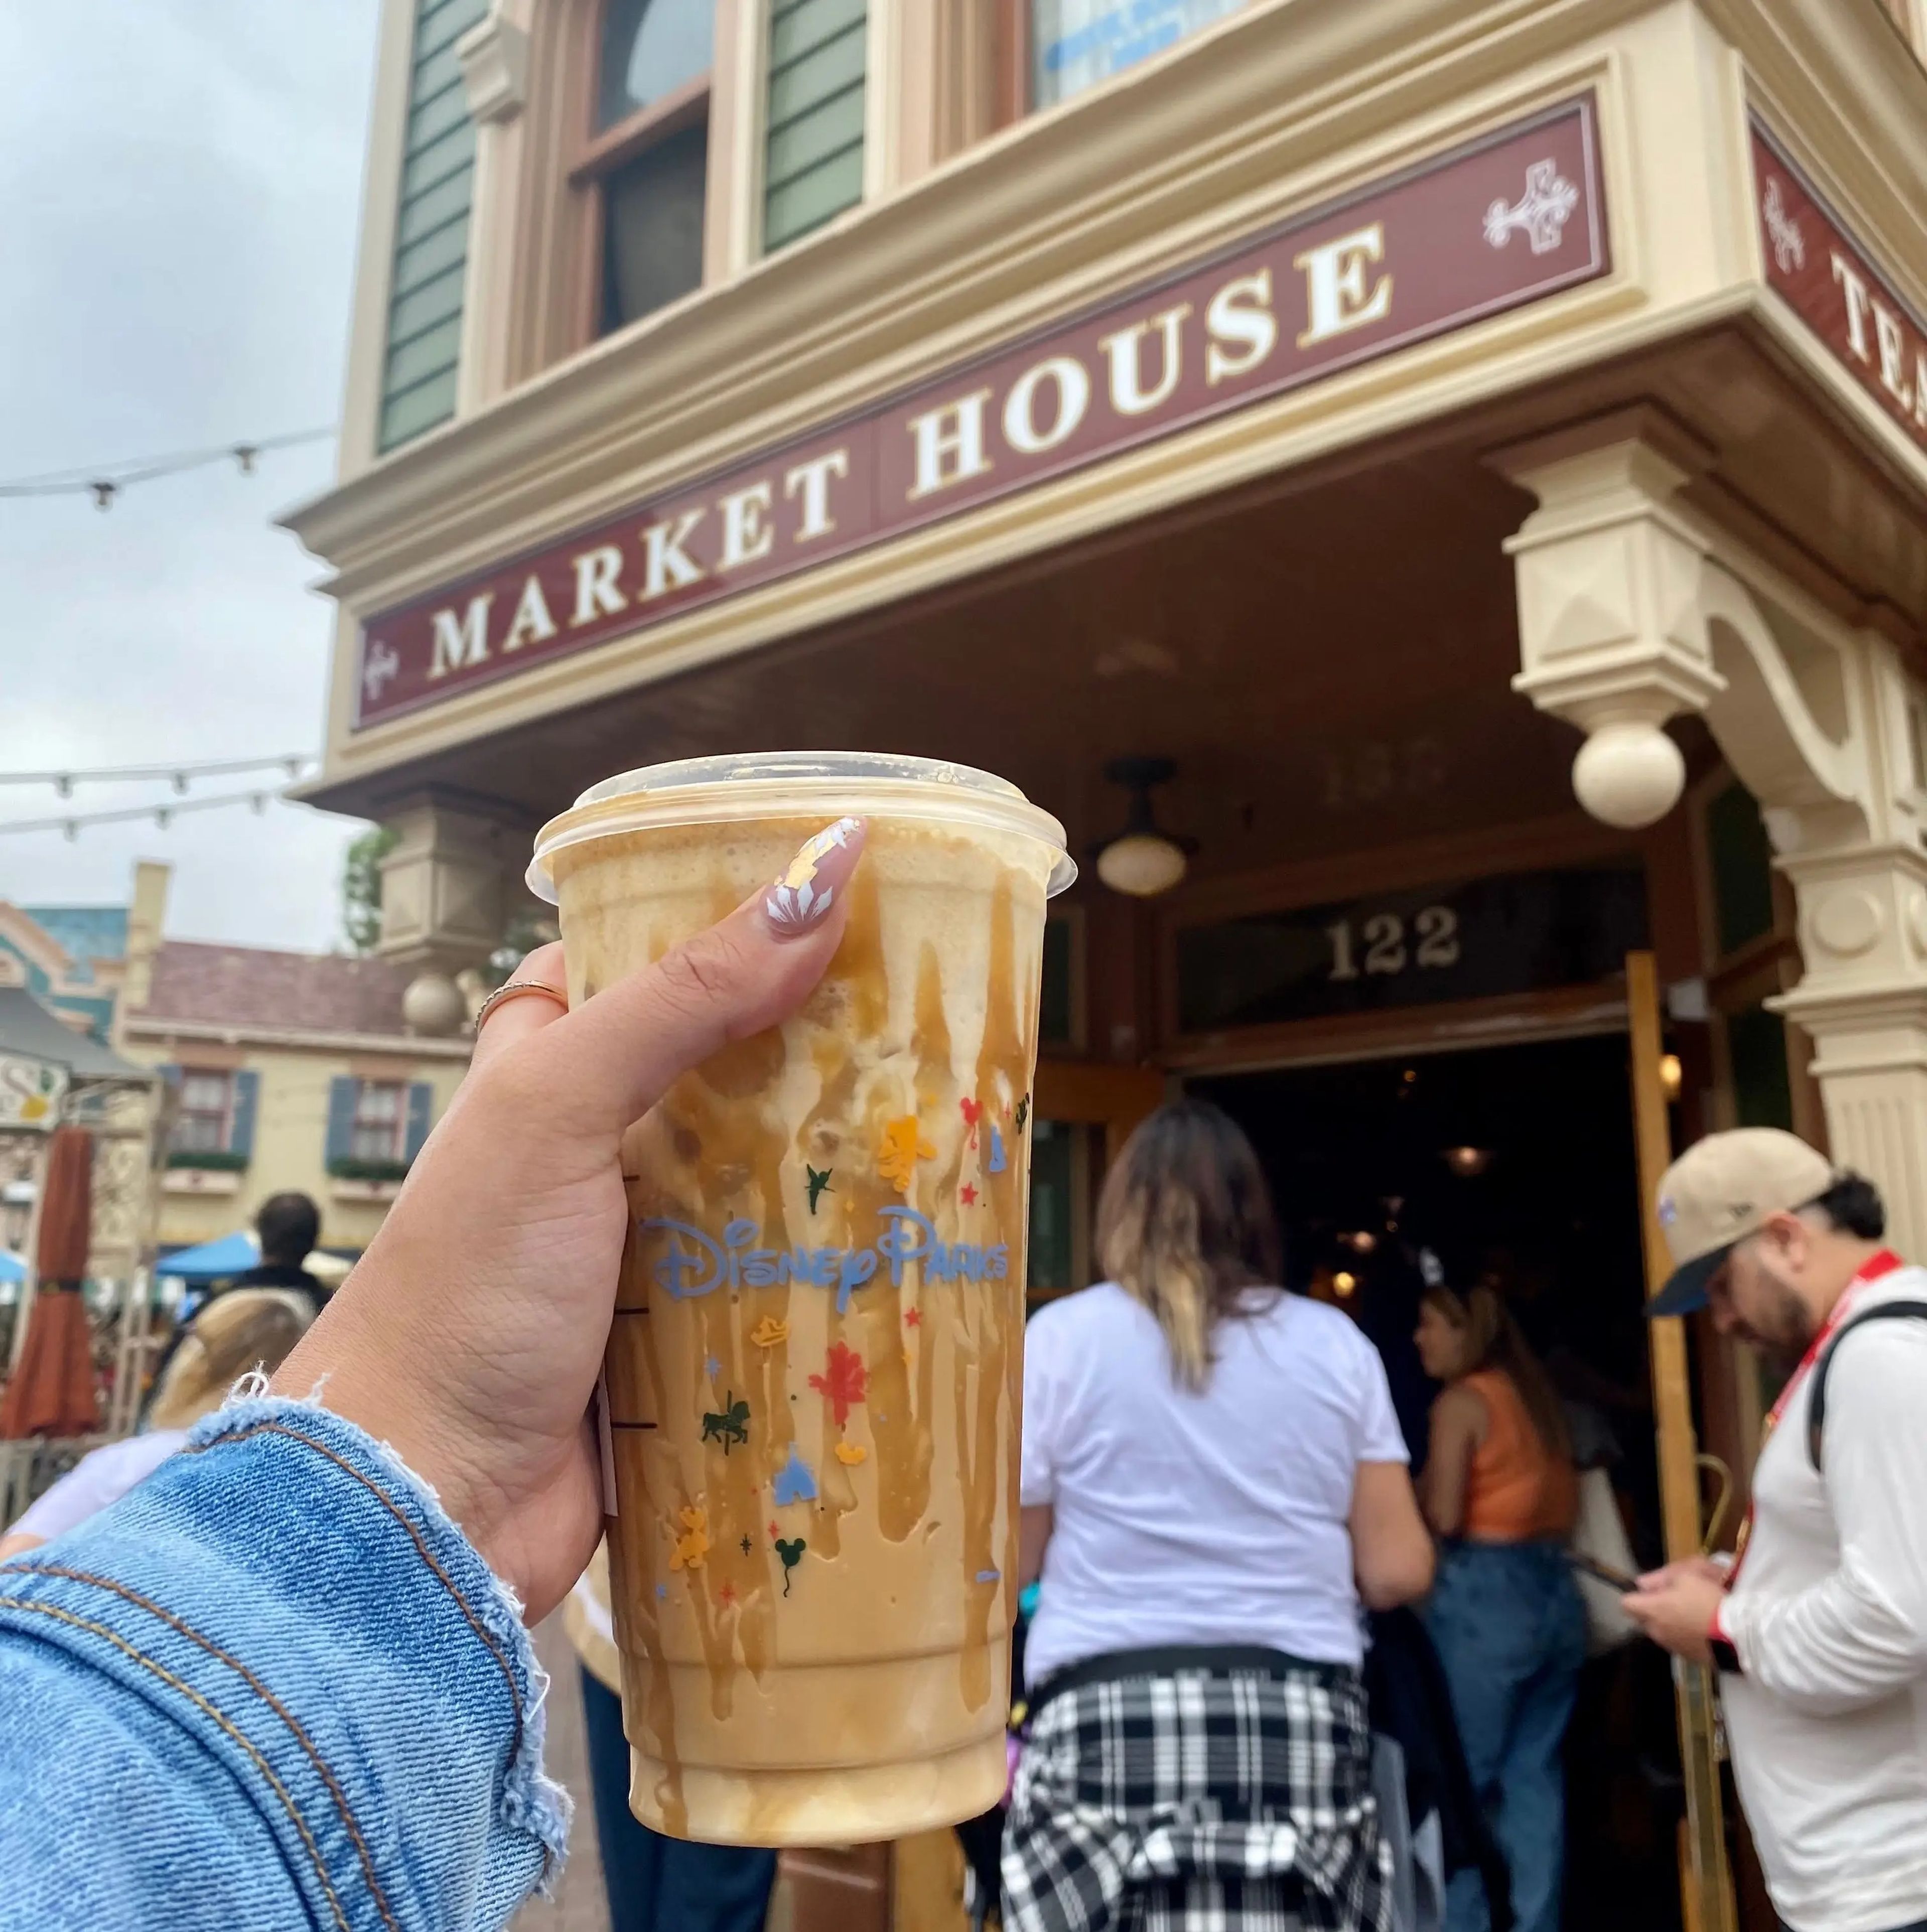 A Disney Parks Starbucks drink in front of the Market House.